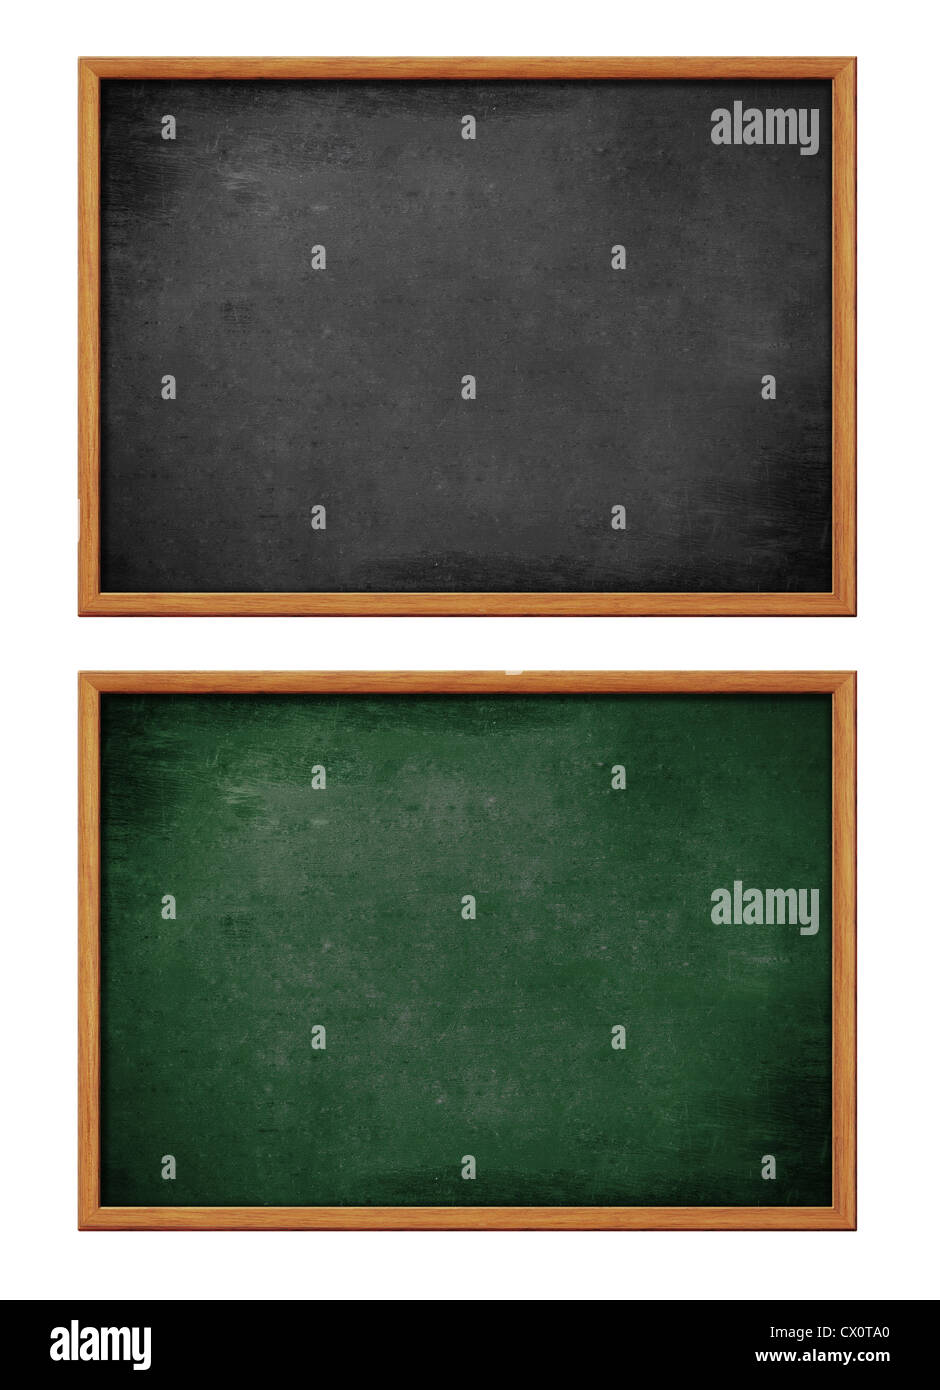 blank black board with wooden frame Stock Photo